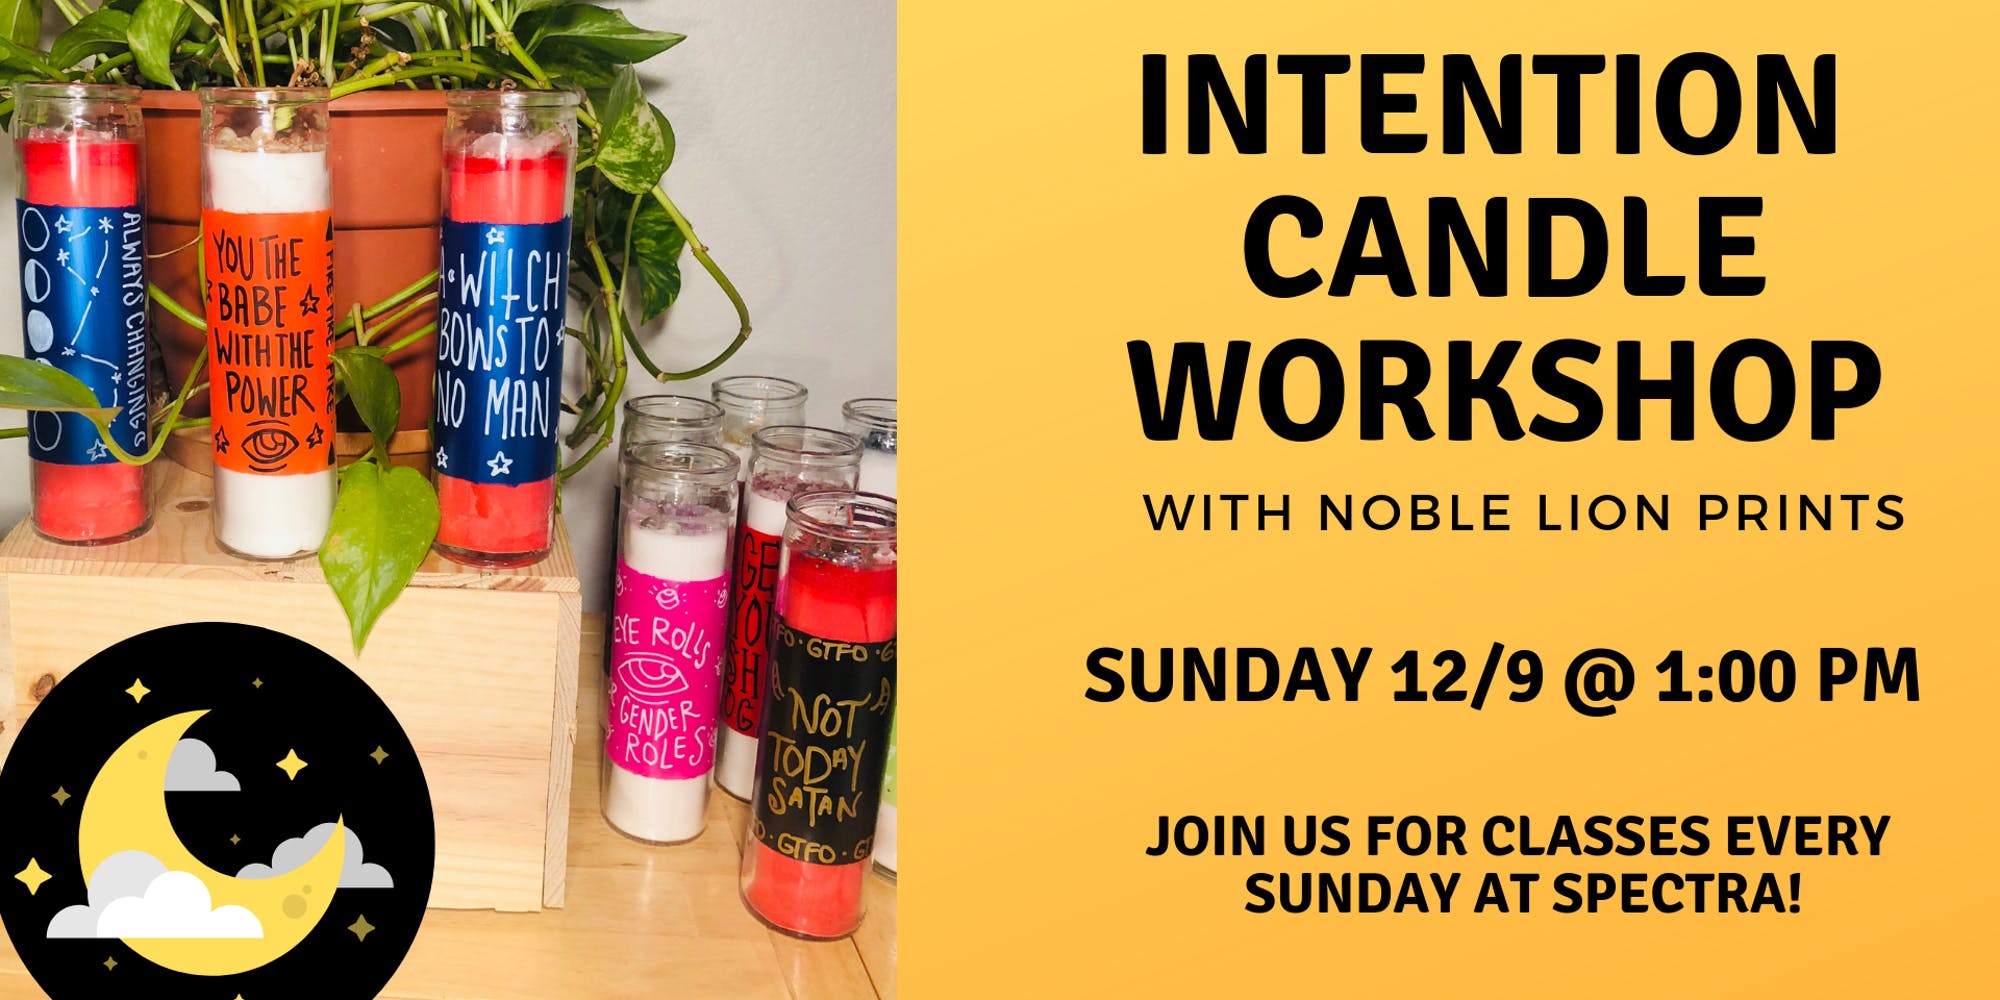 Intention Candle Workshop